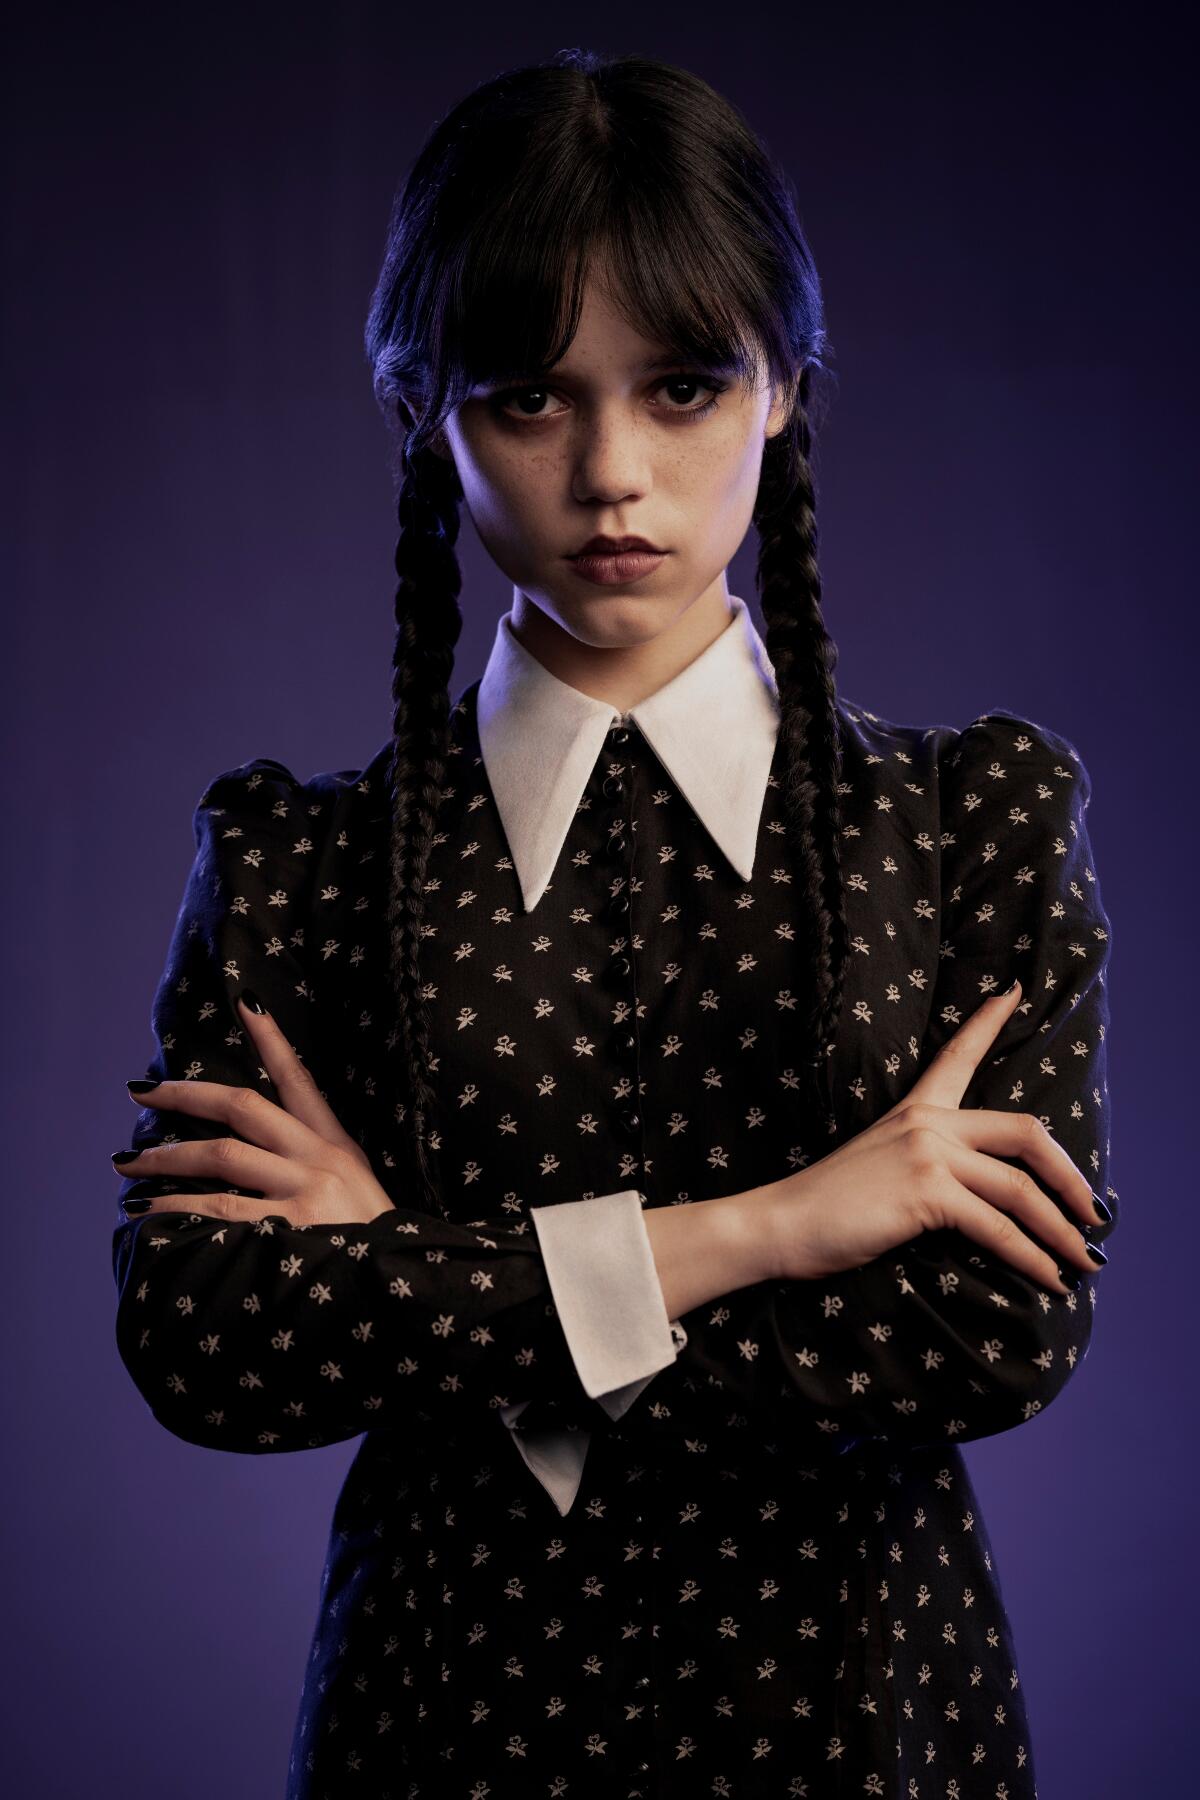 Jenna Ortega wears black dress with a deep white collar and cuffs for her Wednesday Addams look.